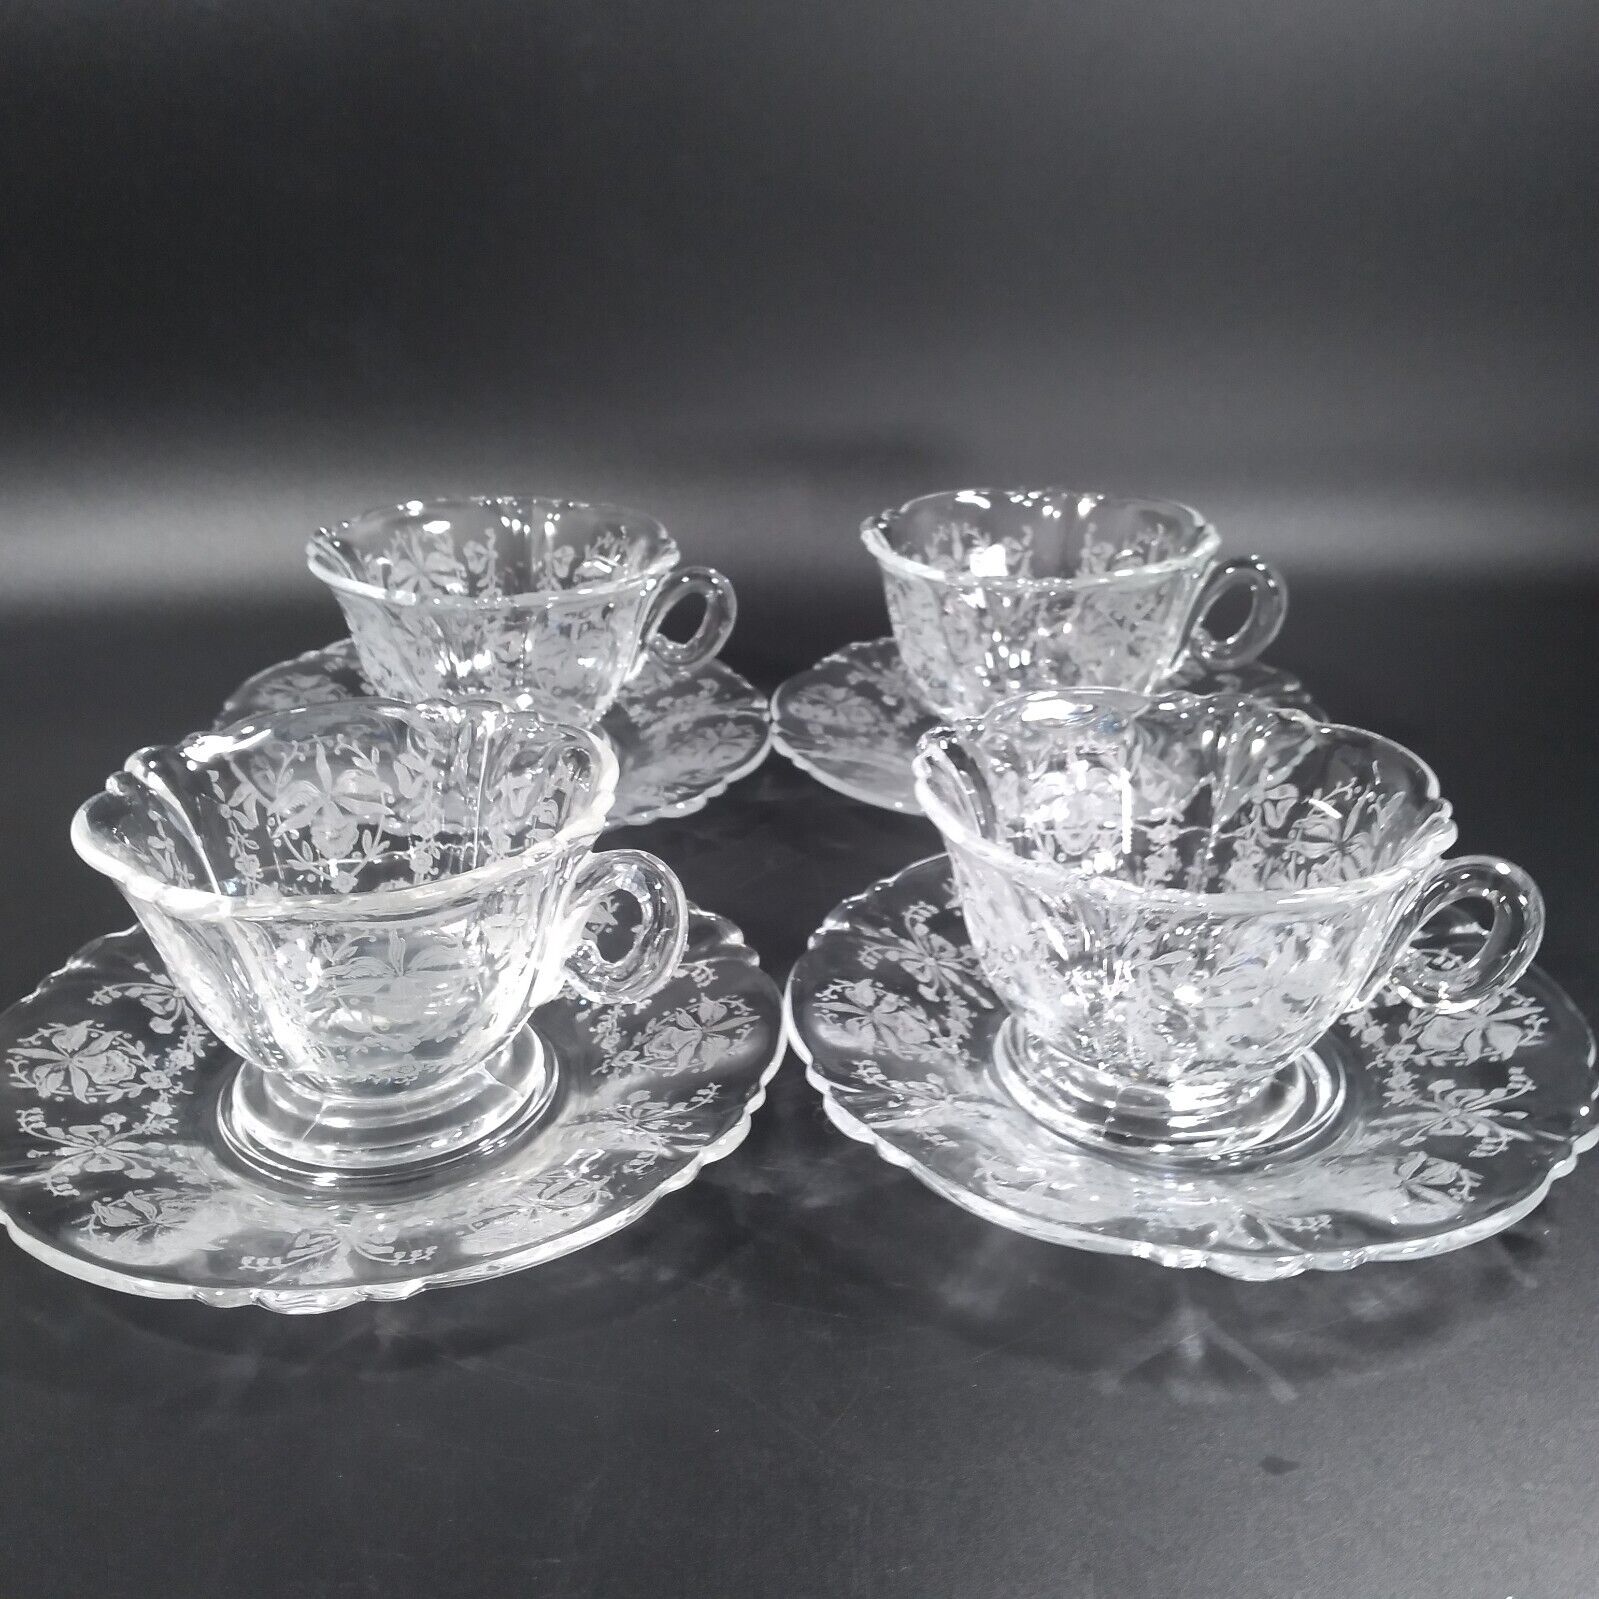 Set of 4 Heisey ORCHID Cup Saucer Set QUEEN ANNE Shape 8 Pieces c. 1940-1957